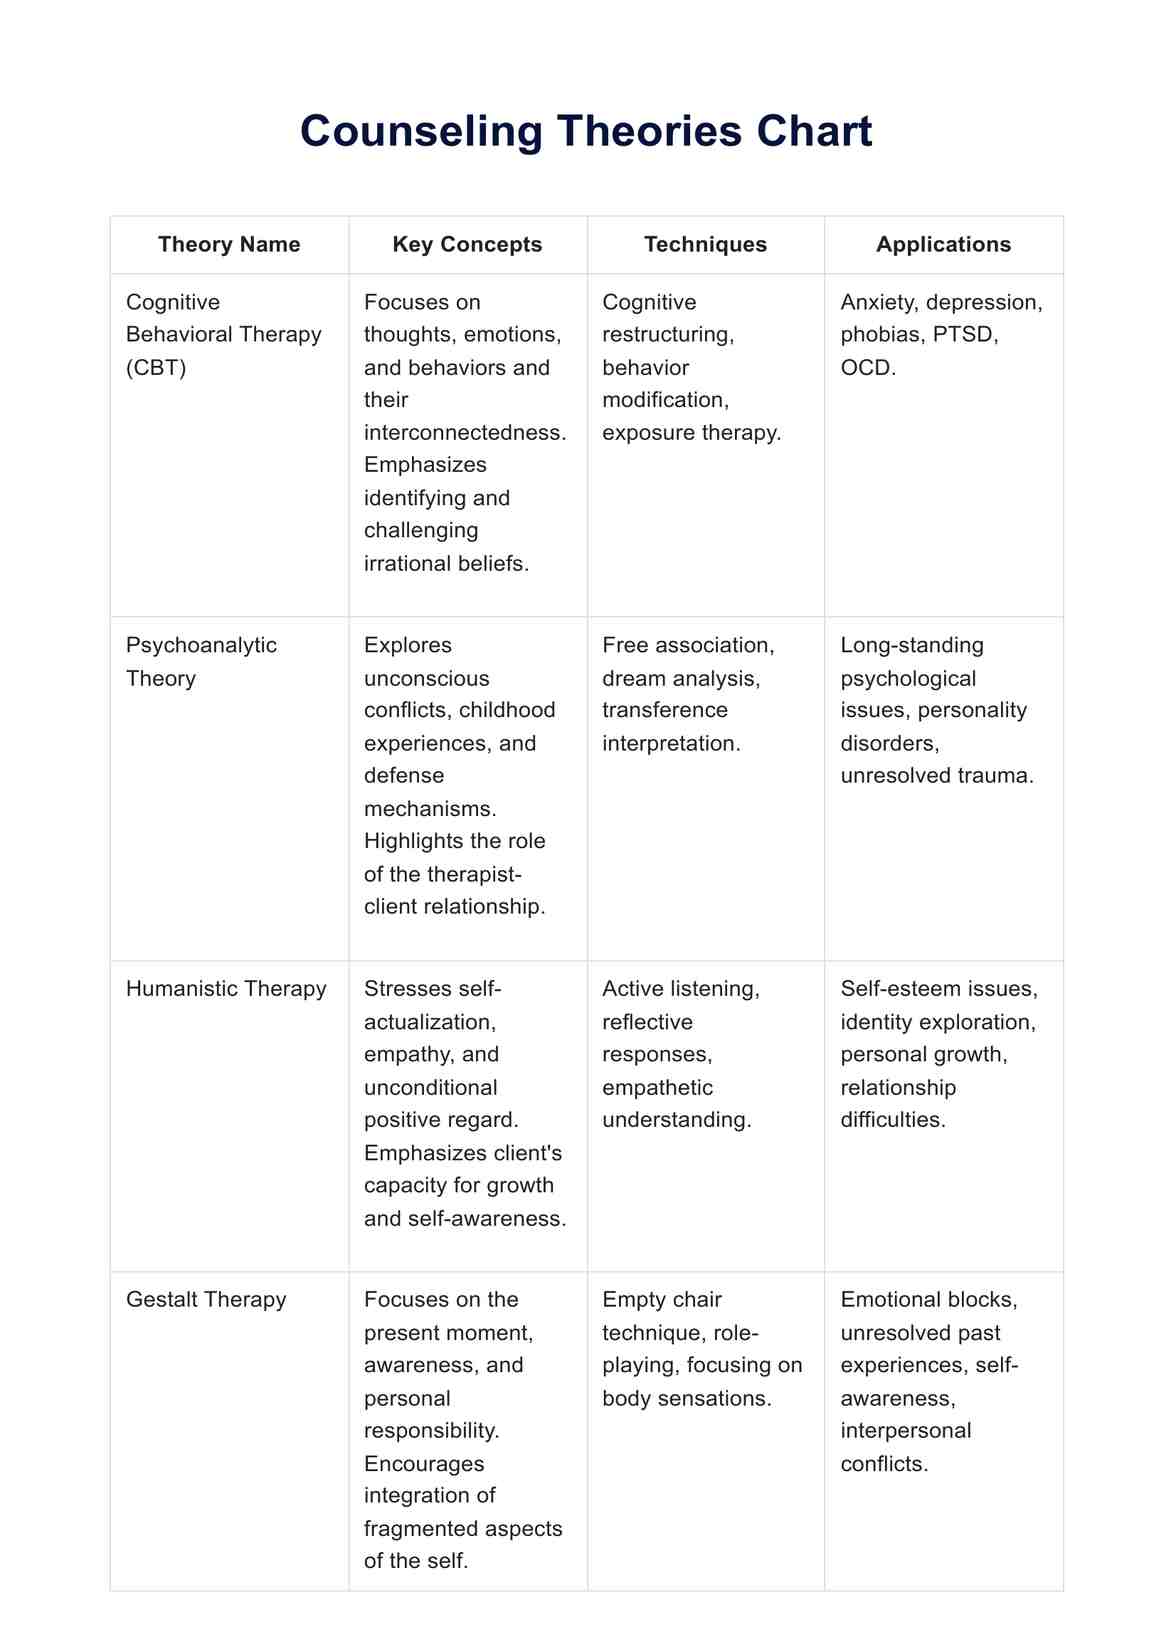 Counseling Theories Chart PDF Example